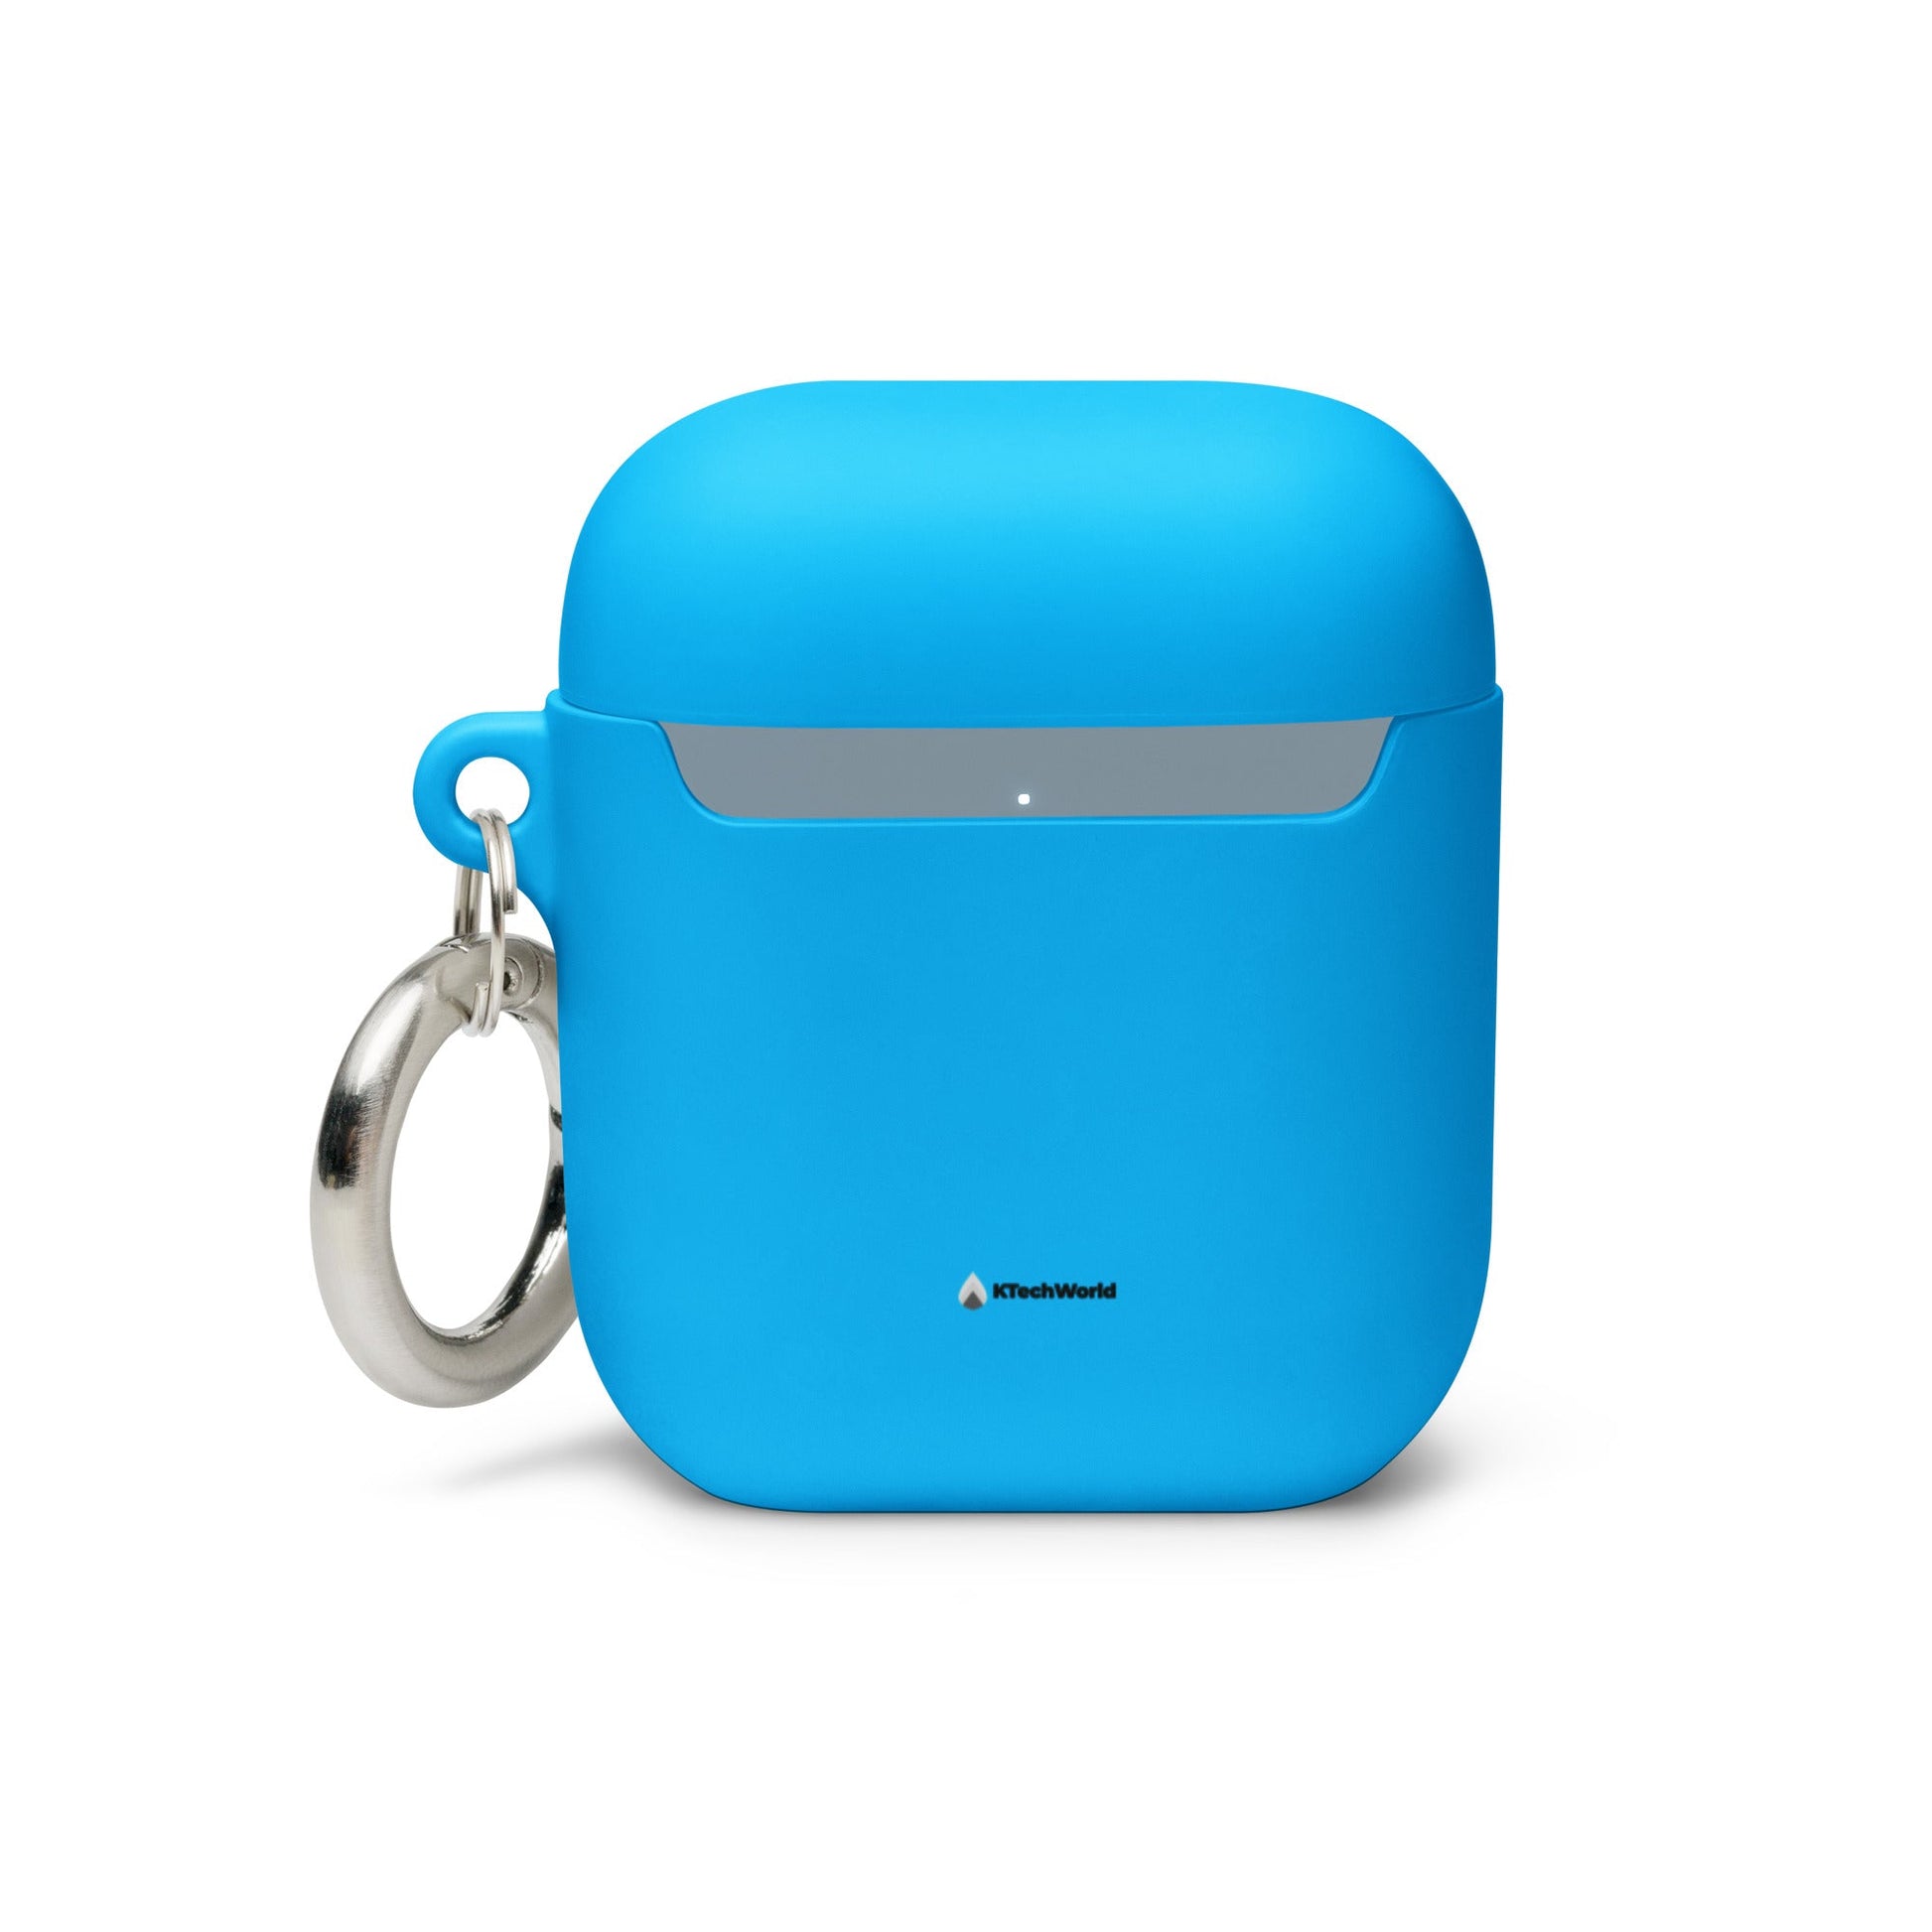 KTechWorld - AirPods/Pro case with Cool Icon - KTechWorld